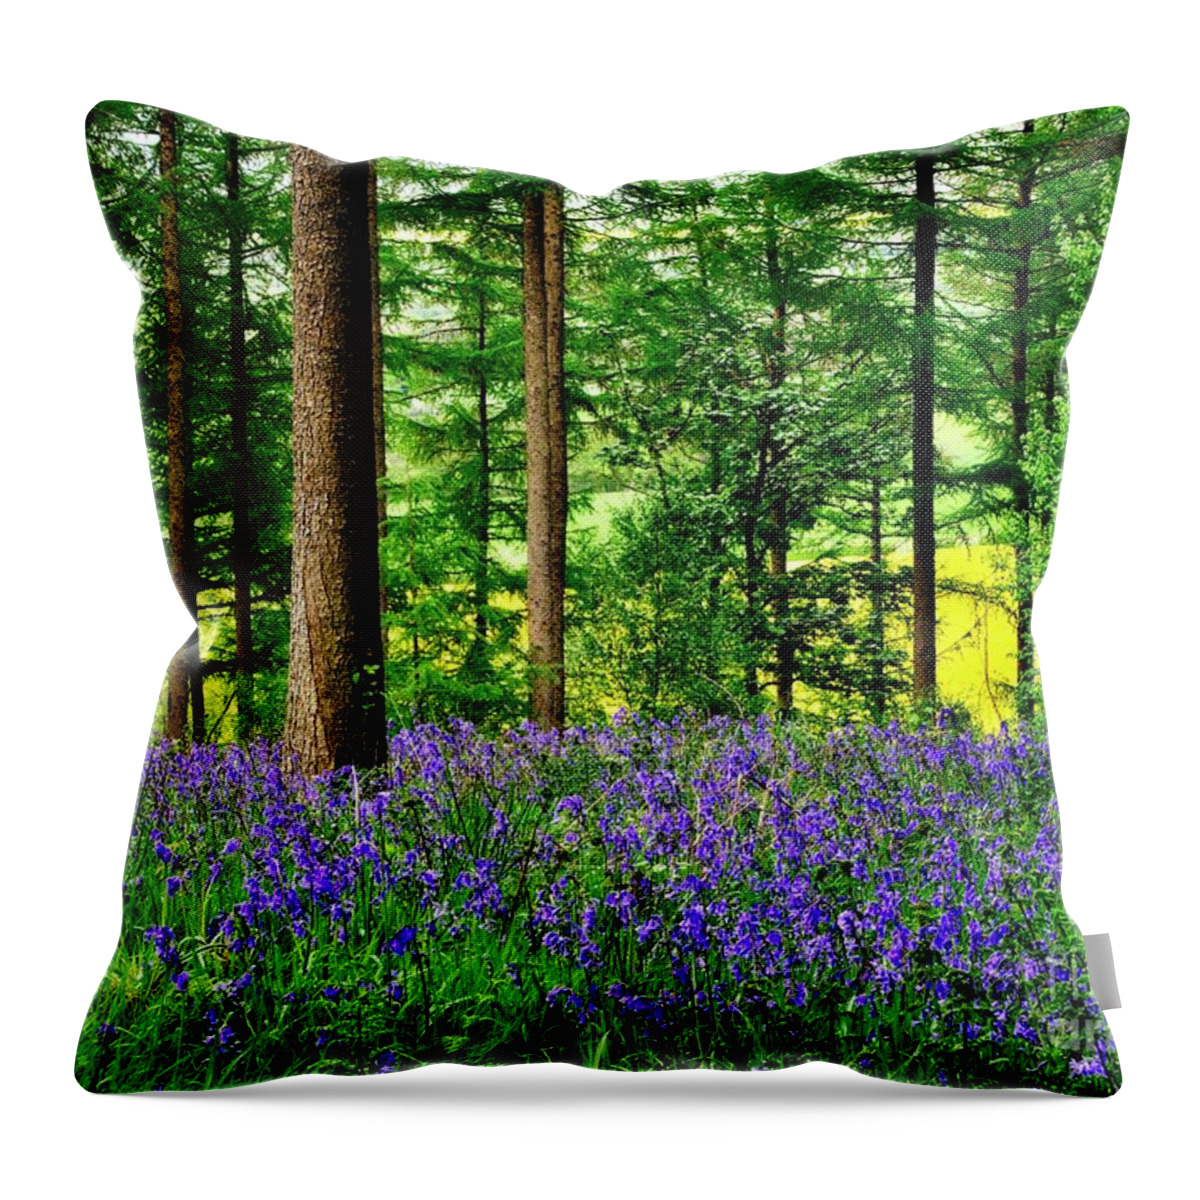 Bluebell Throw Pillow featuring the photograph English Bluebell Wood #2 by Martyn Arnold